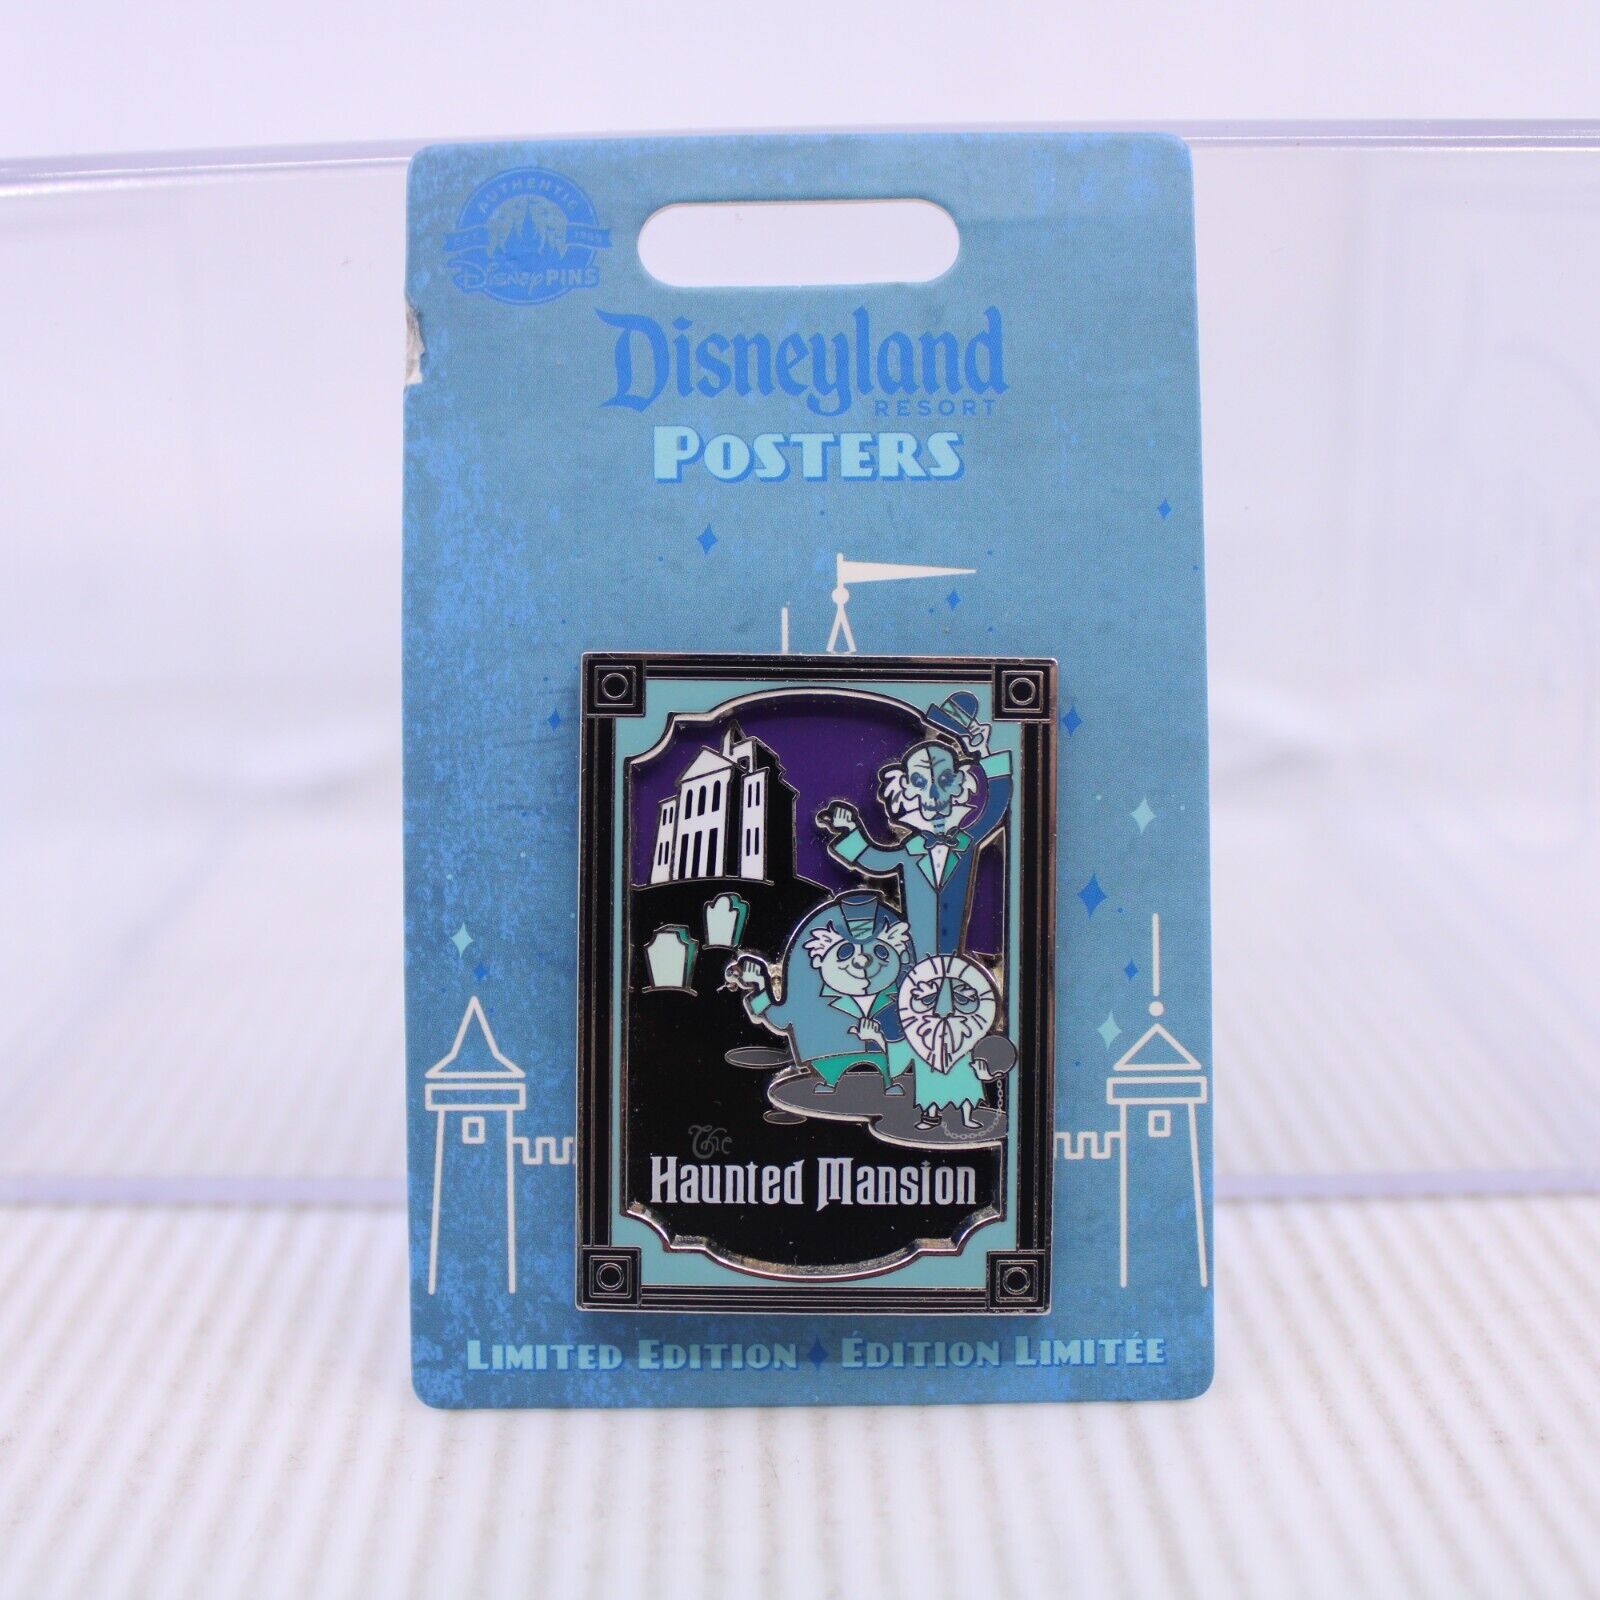 C2 Disney DLR LE Pin Disneyland Poster Posters Haunted Mansion Hitchhiking Ghost